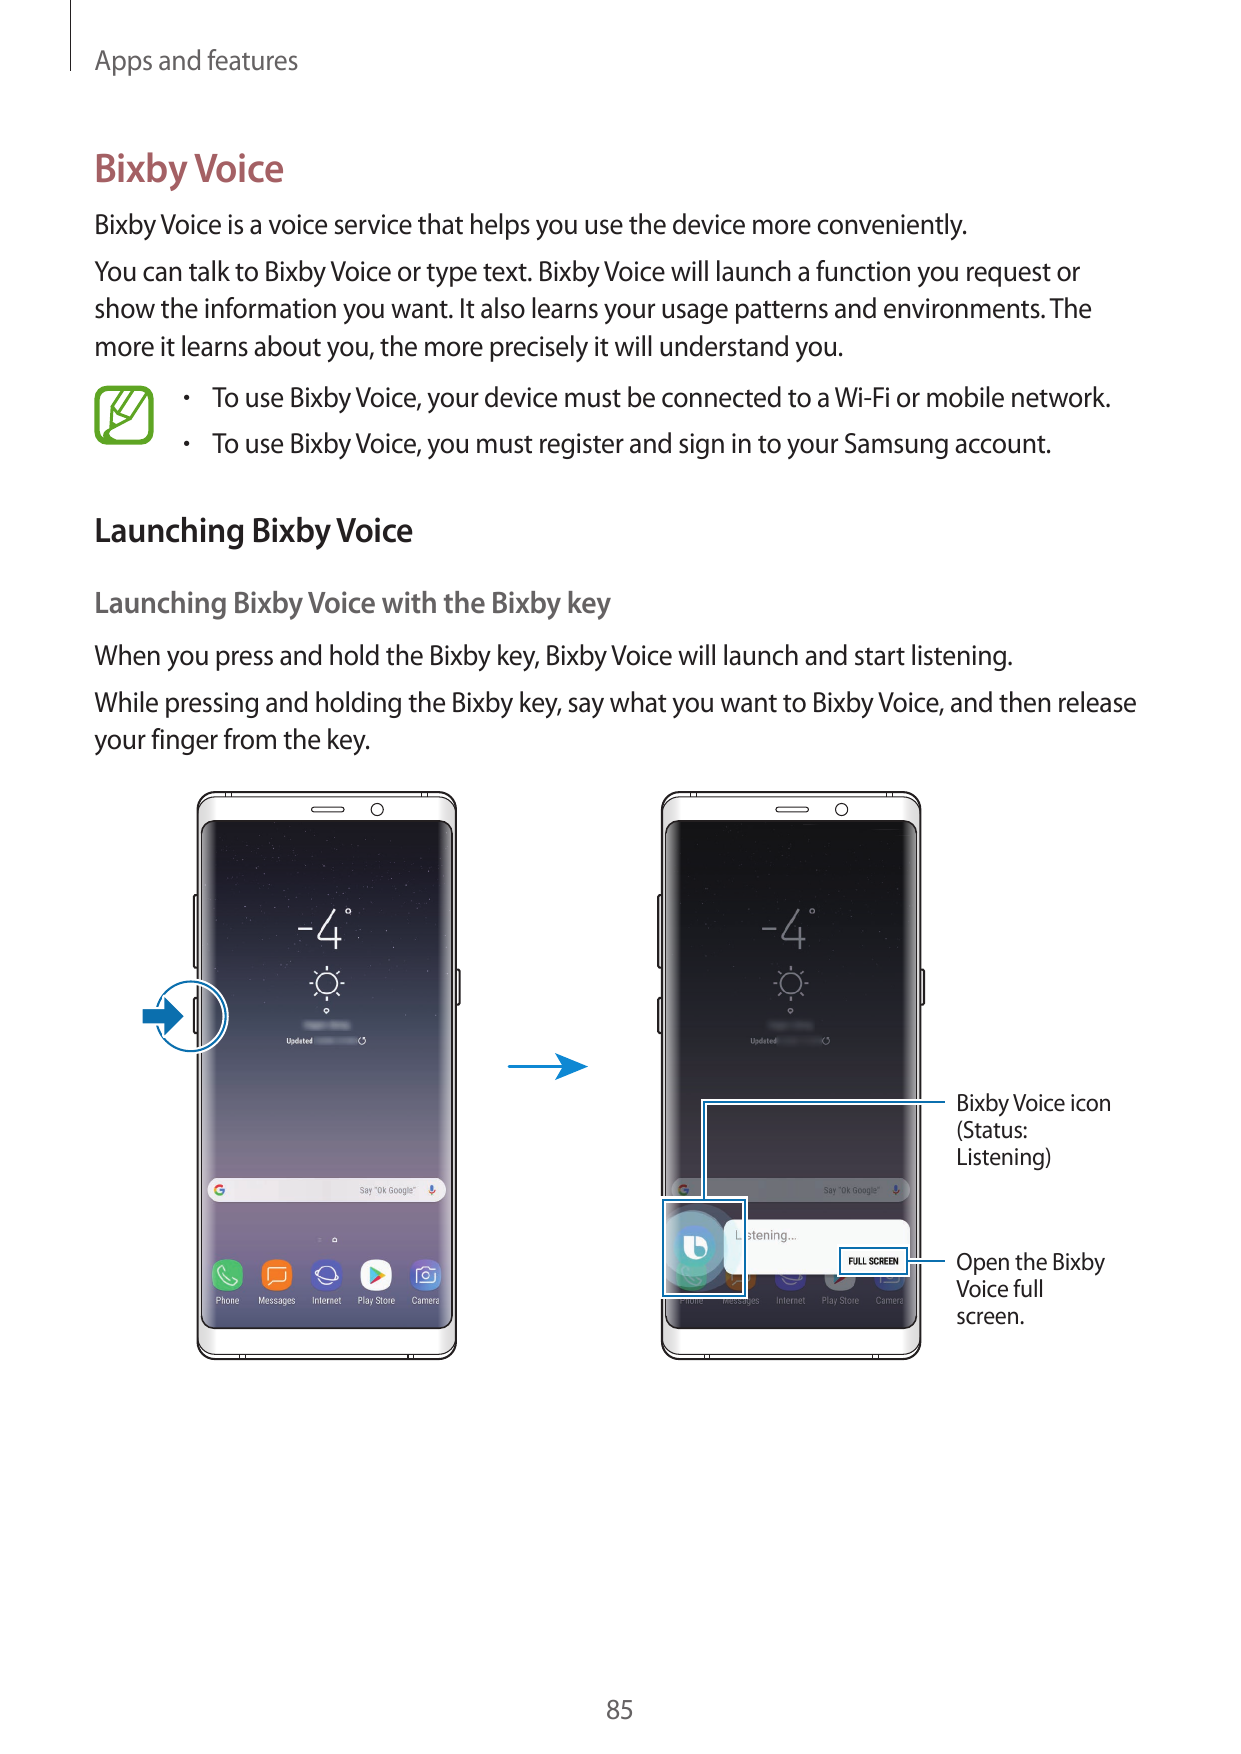 Apps and featuresBixby VoiceBixby Voice is a voice service that helps you use the device more conveniently.You can talk to Bixby